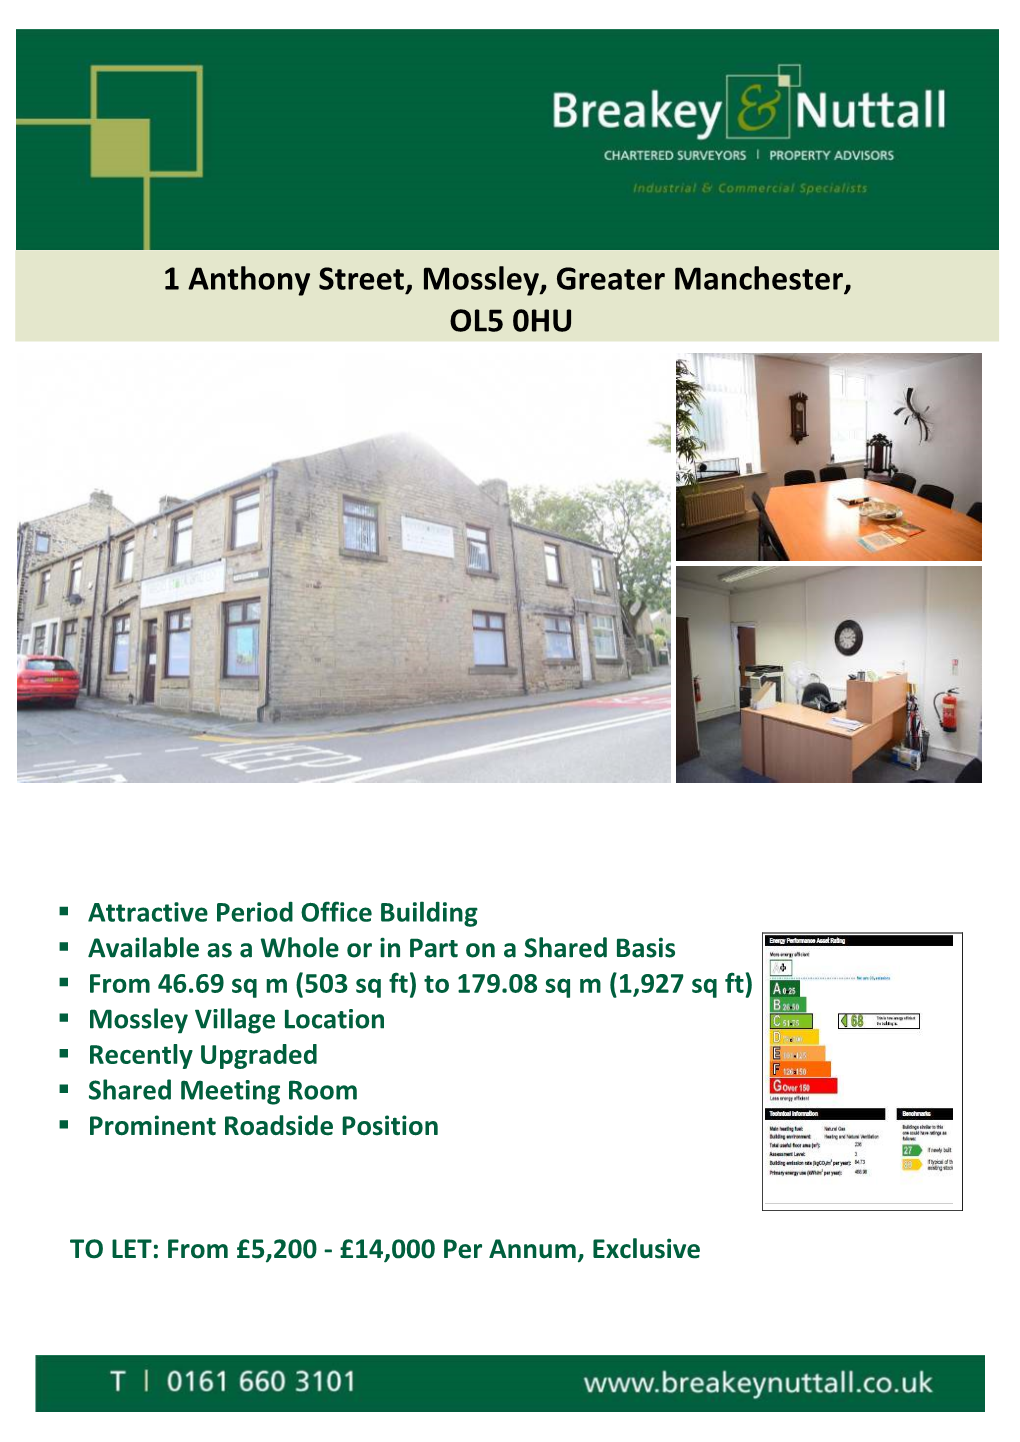 1 Anthony Street, Mossley, Greater Manchester, OL5 0HU